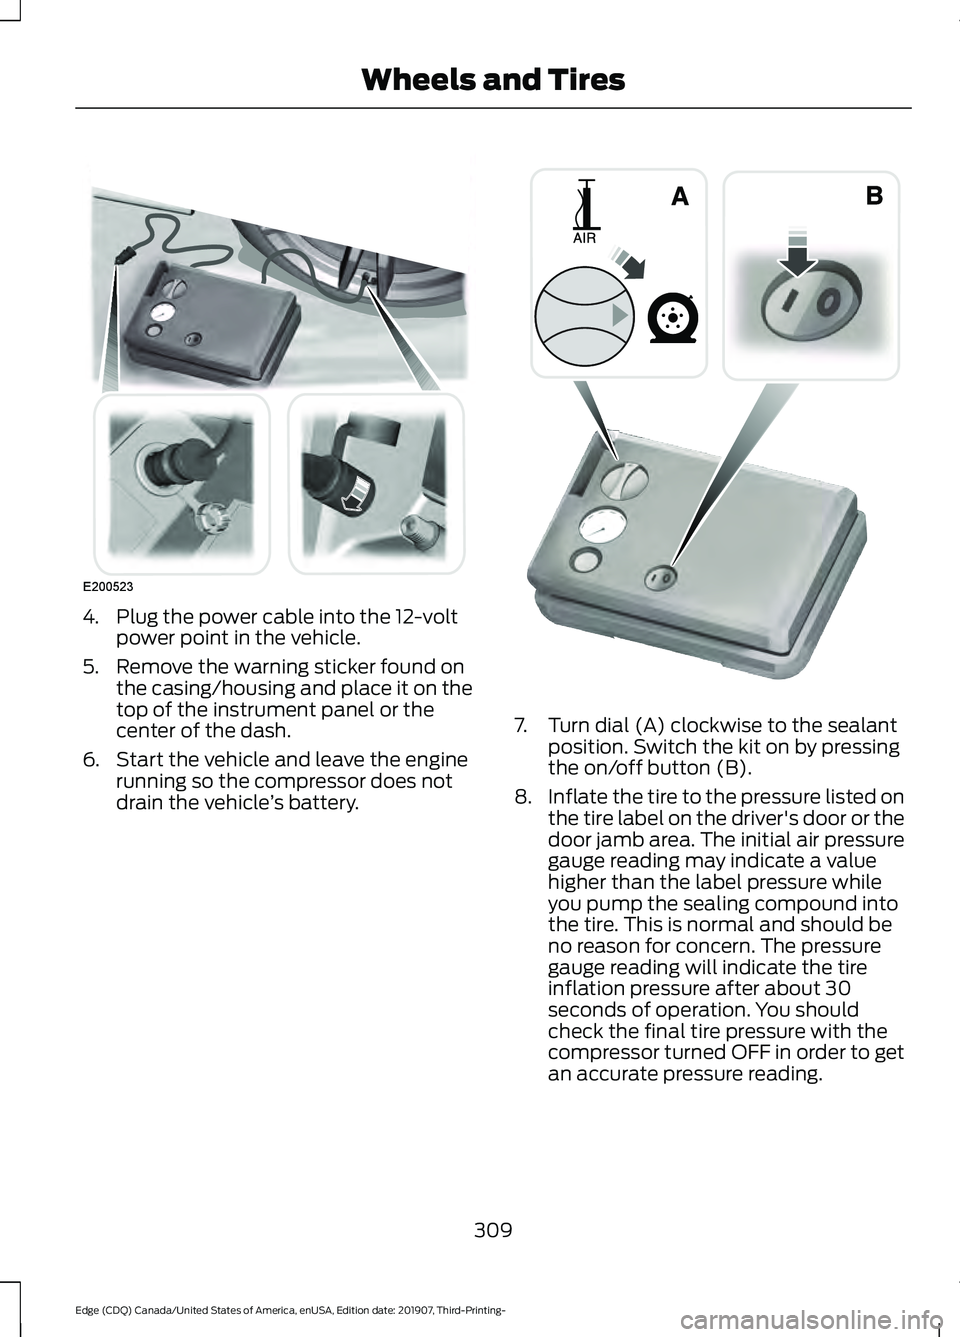 FORD EDGE 2020  Owners Manual 4. Plug the power cable into the 12-volt
power point in the vehicle.
5. Remove the warning sticker found on the casing/housing and place it on the
top of the instrument panel or the
center of the dash